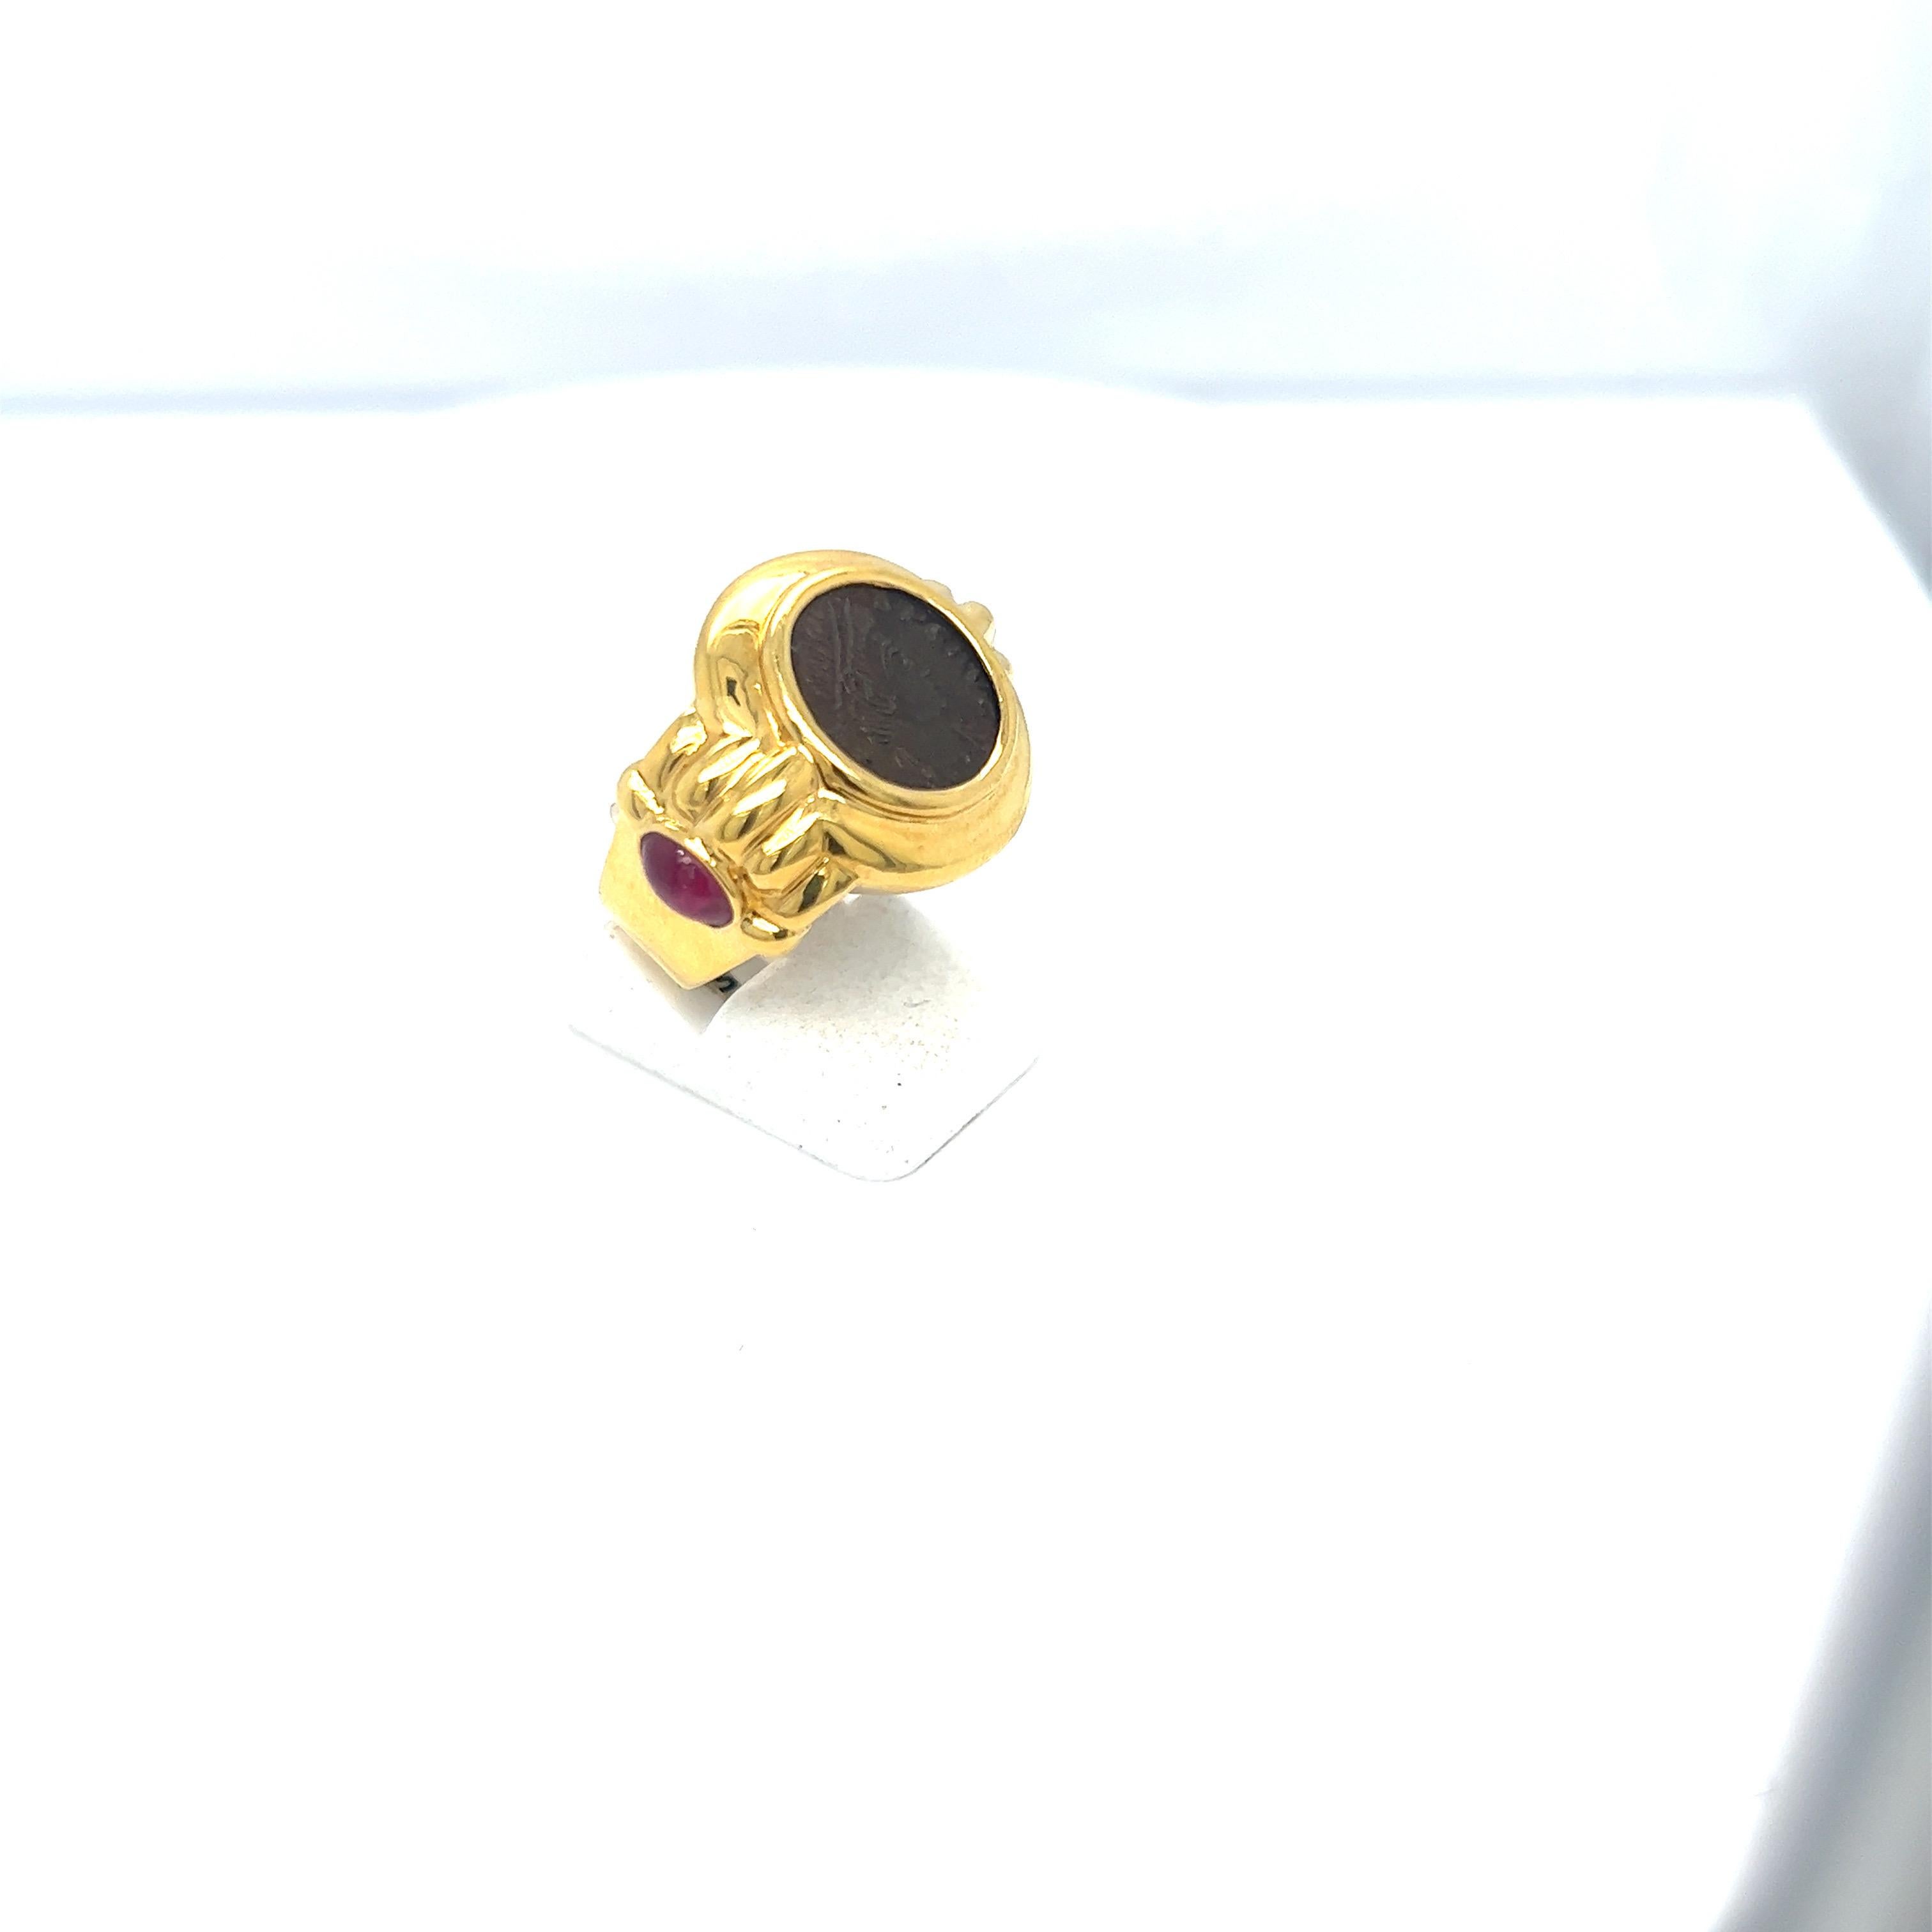 Vintage 18 karat yellow gold ring set with a blackened coin .The sides of the ring are set with oval cabochon rubies.
Stamped 750 18 k
Ring size 6.5